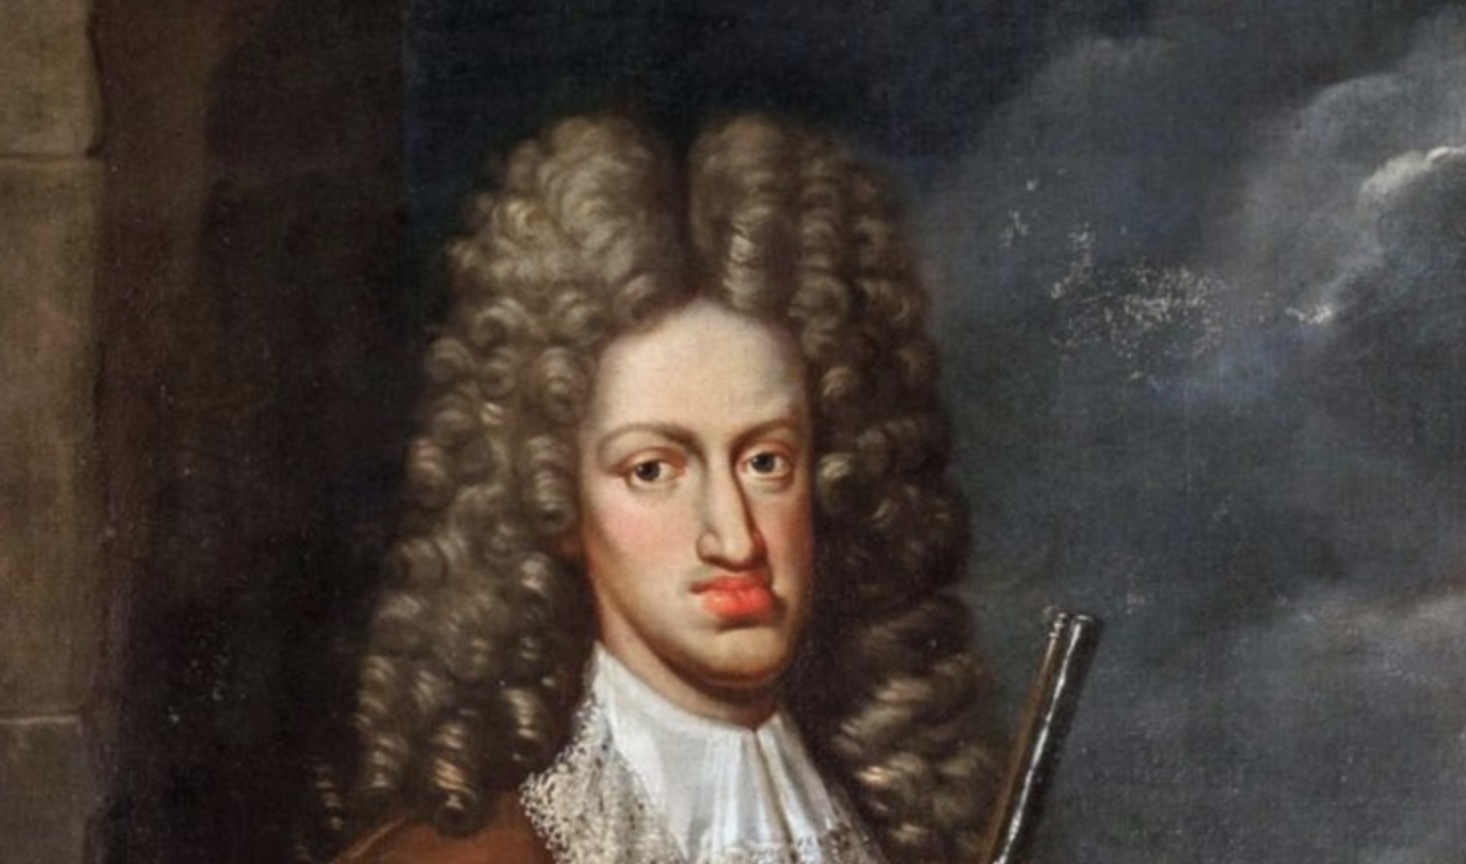 The Habsburg Jaw And The Cost Of Royal Inbreeding